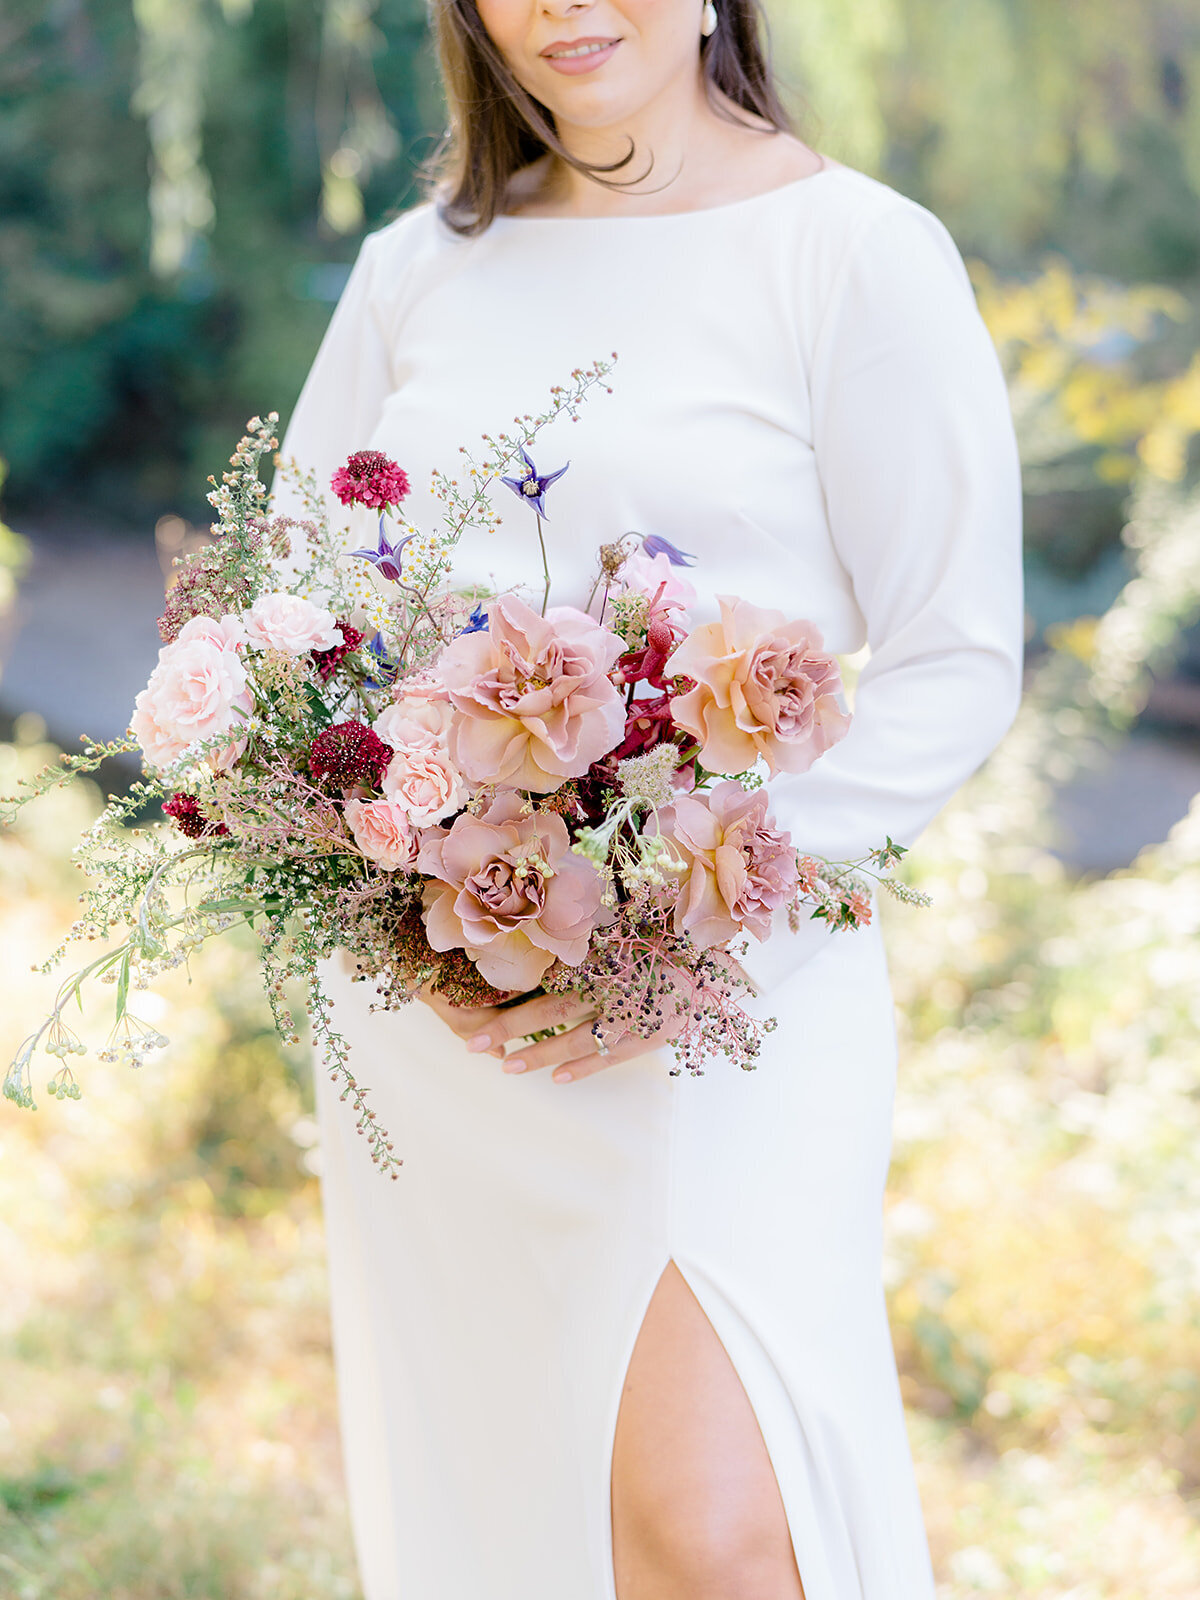 River House Wedding - New Hope, PA - October 2020 - Photography by Magdalena Studios - Design by Shannon Wellington - 258_websize